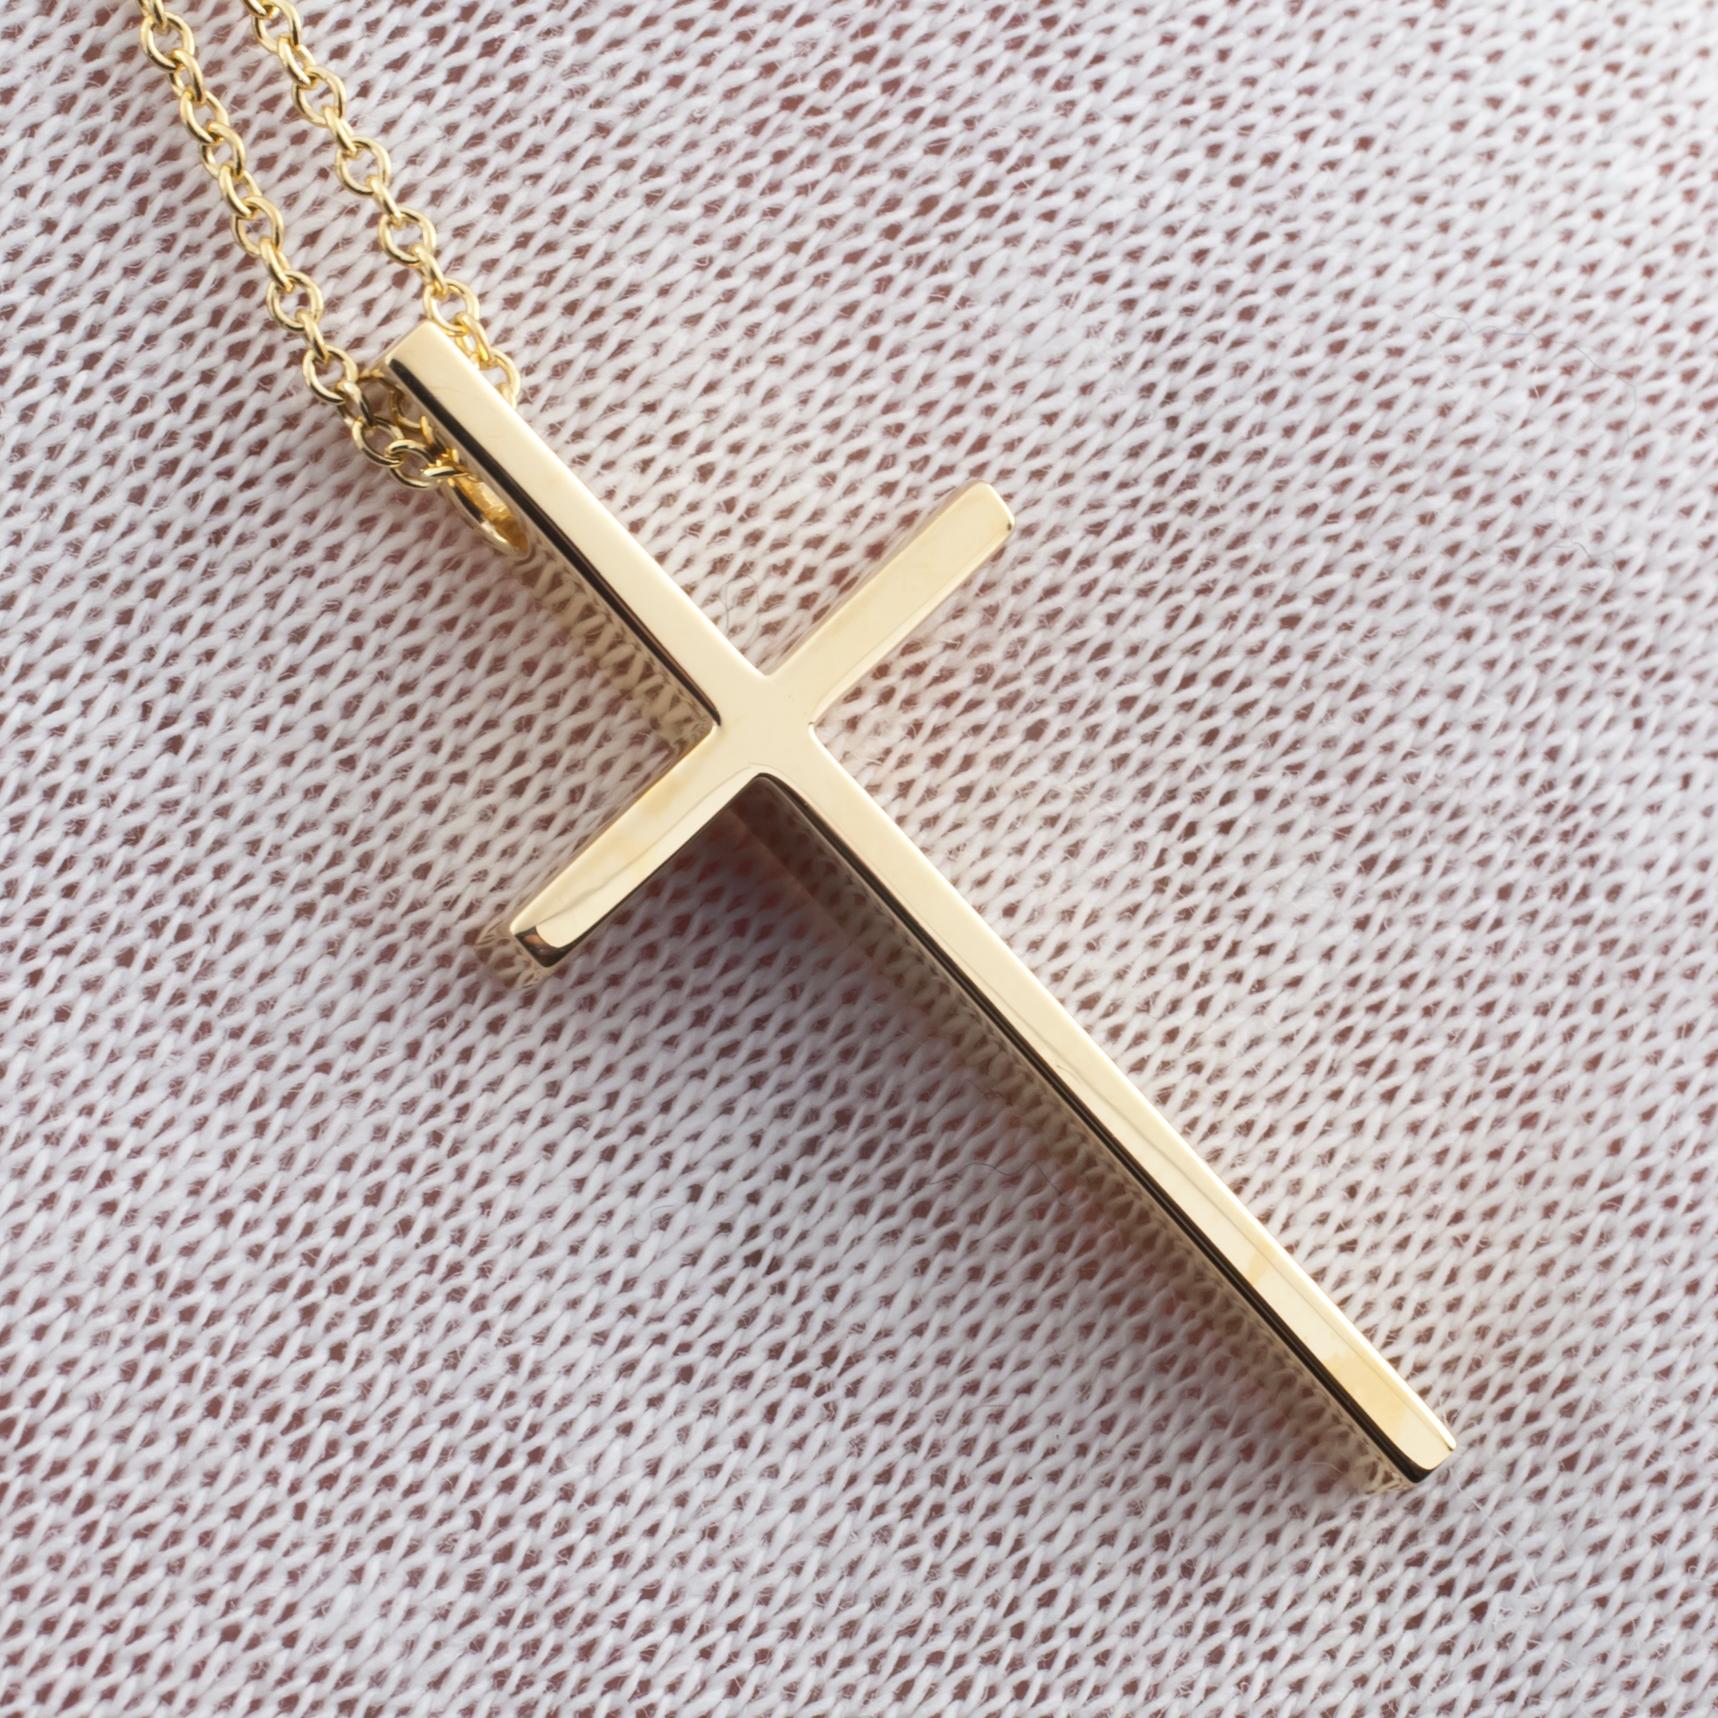 Modern Tiffany & Co. Yellow Gold Metro Cross Pendant with Chain Box and Pouch